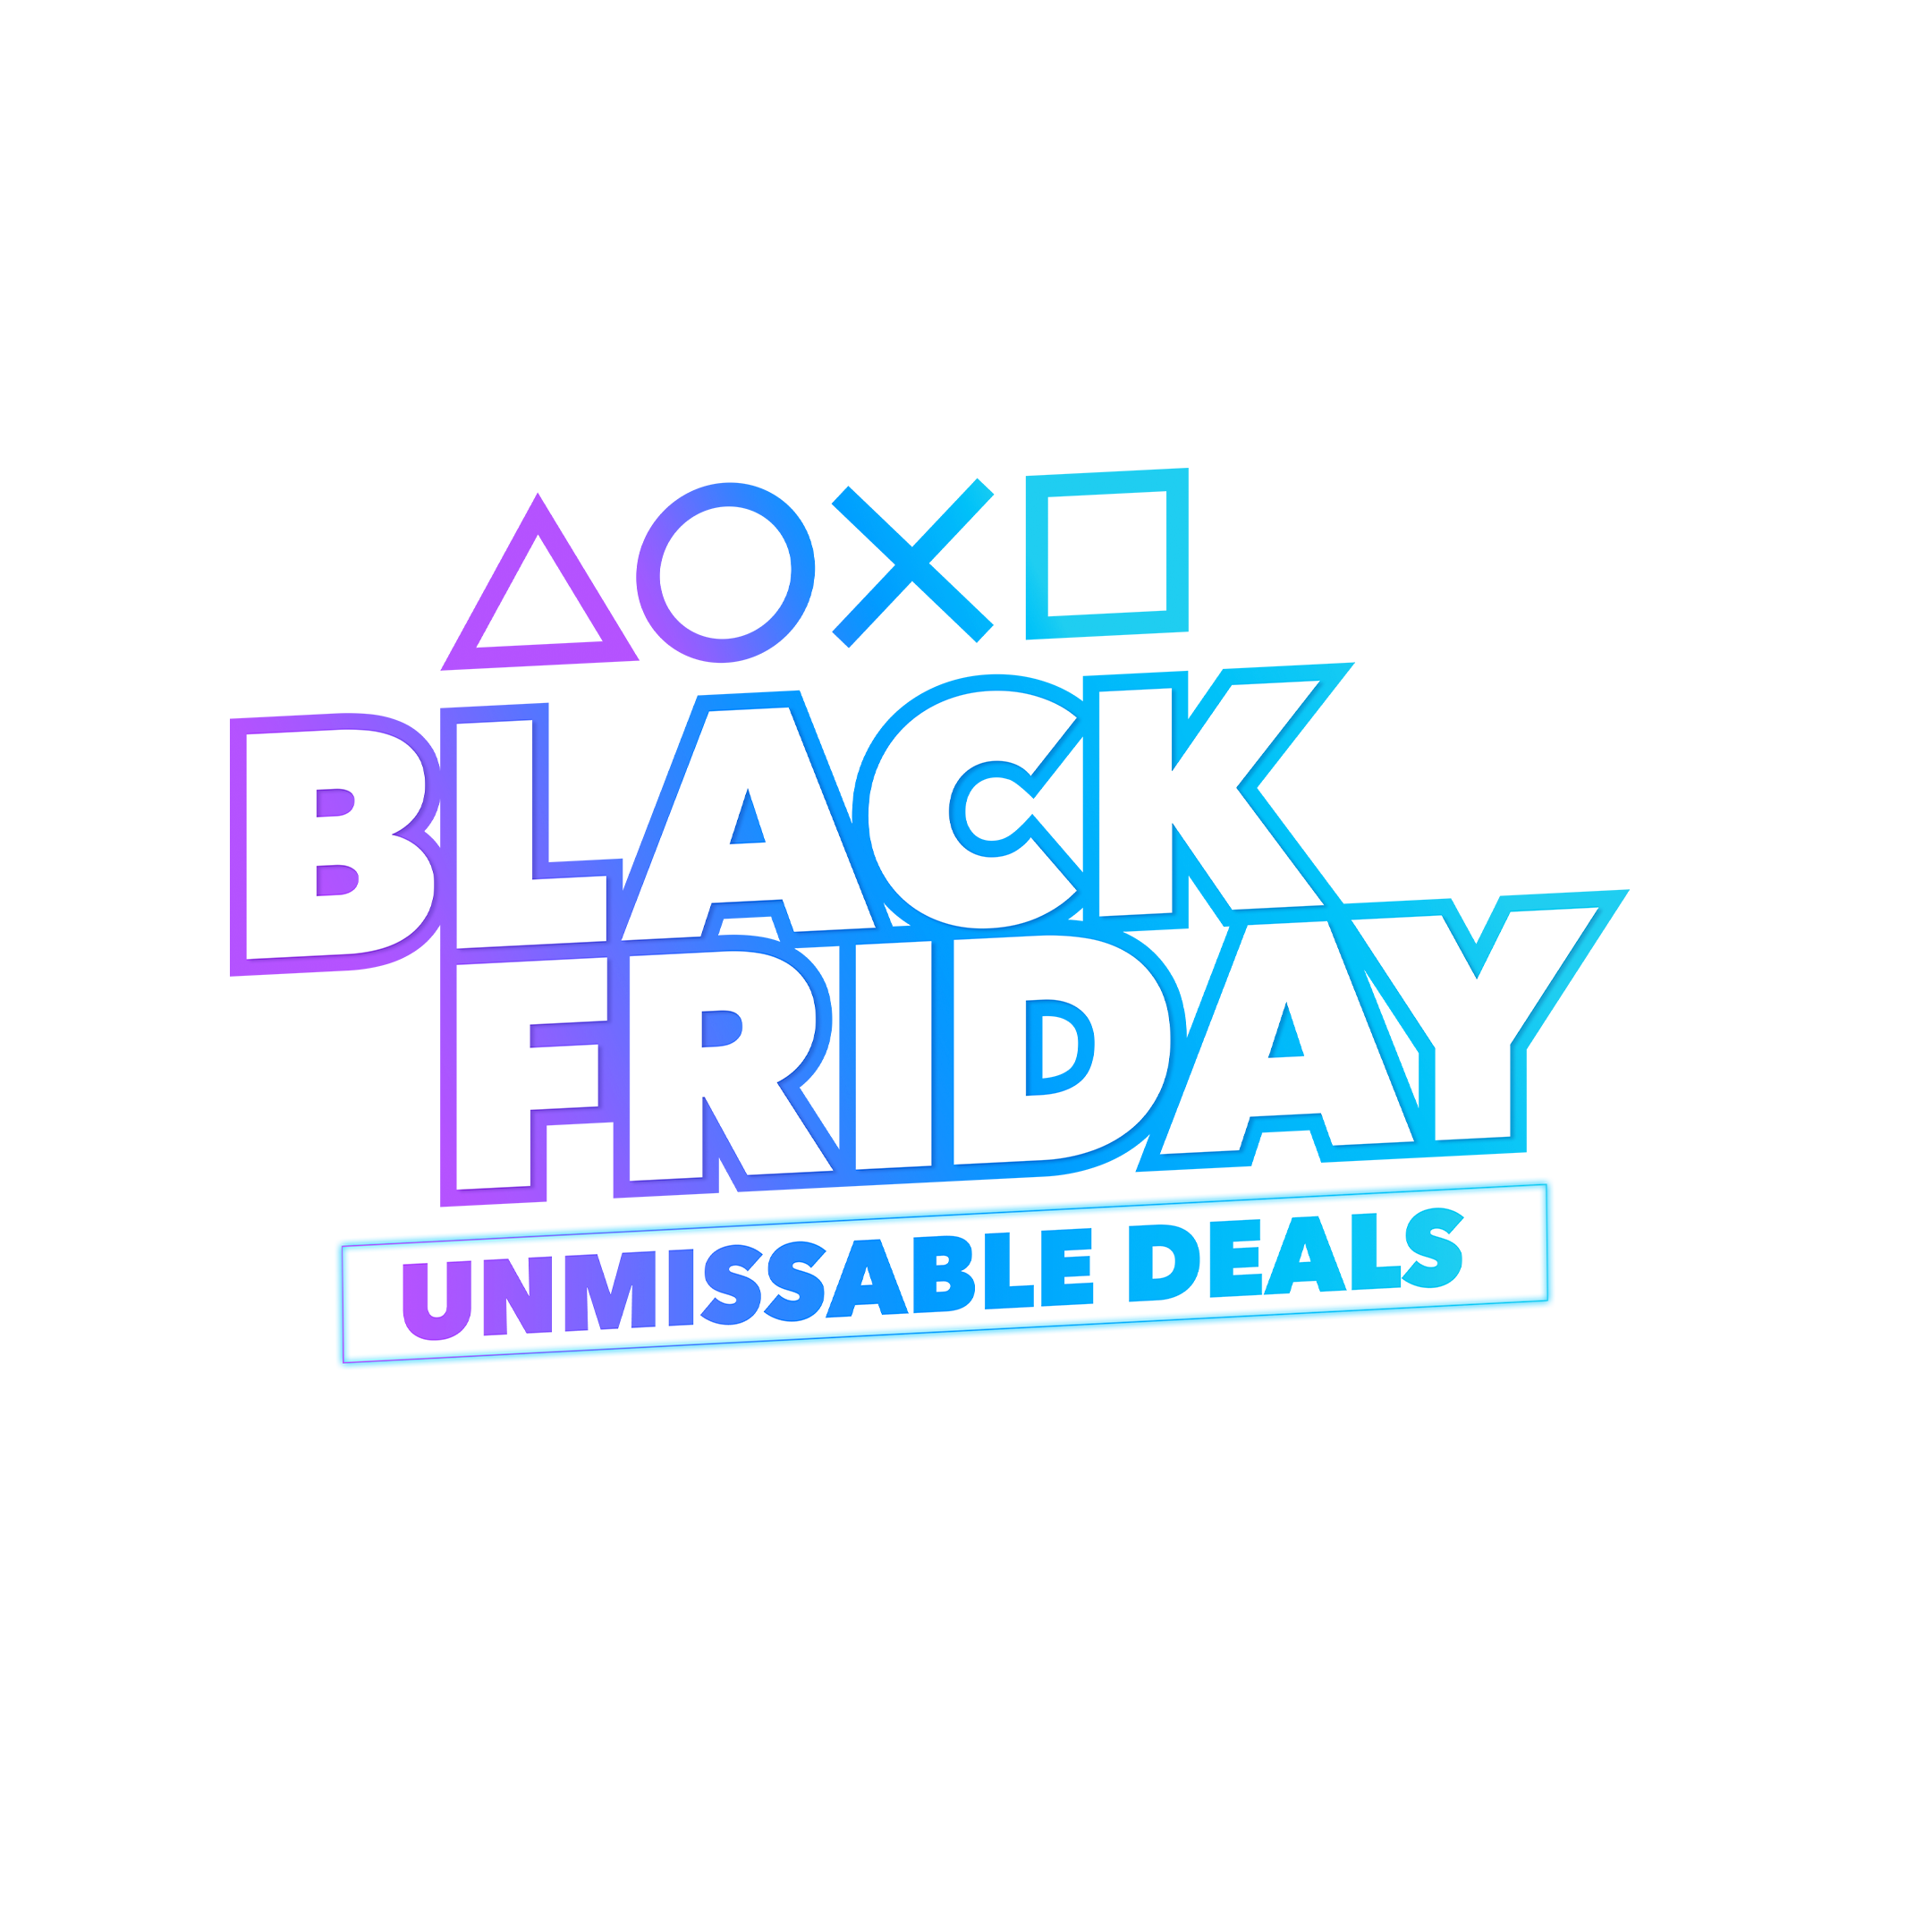 PS Plus - Black Friday  Unmissable deals are now on the PS Store